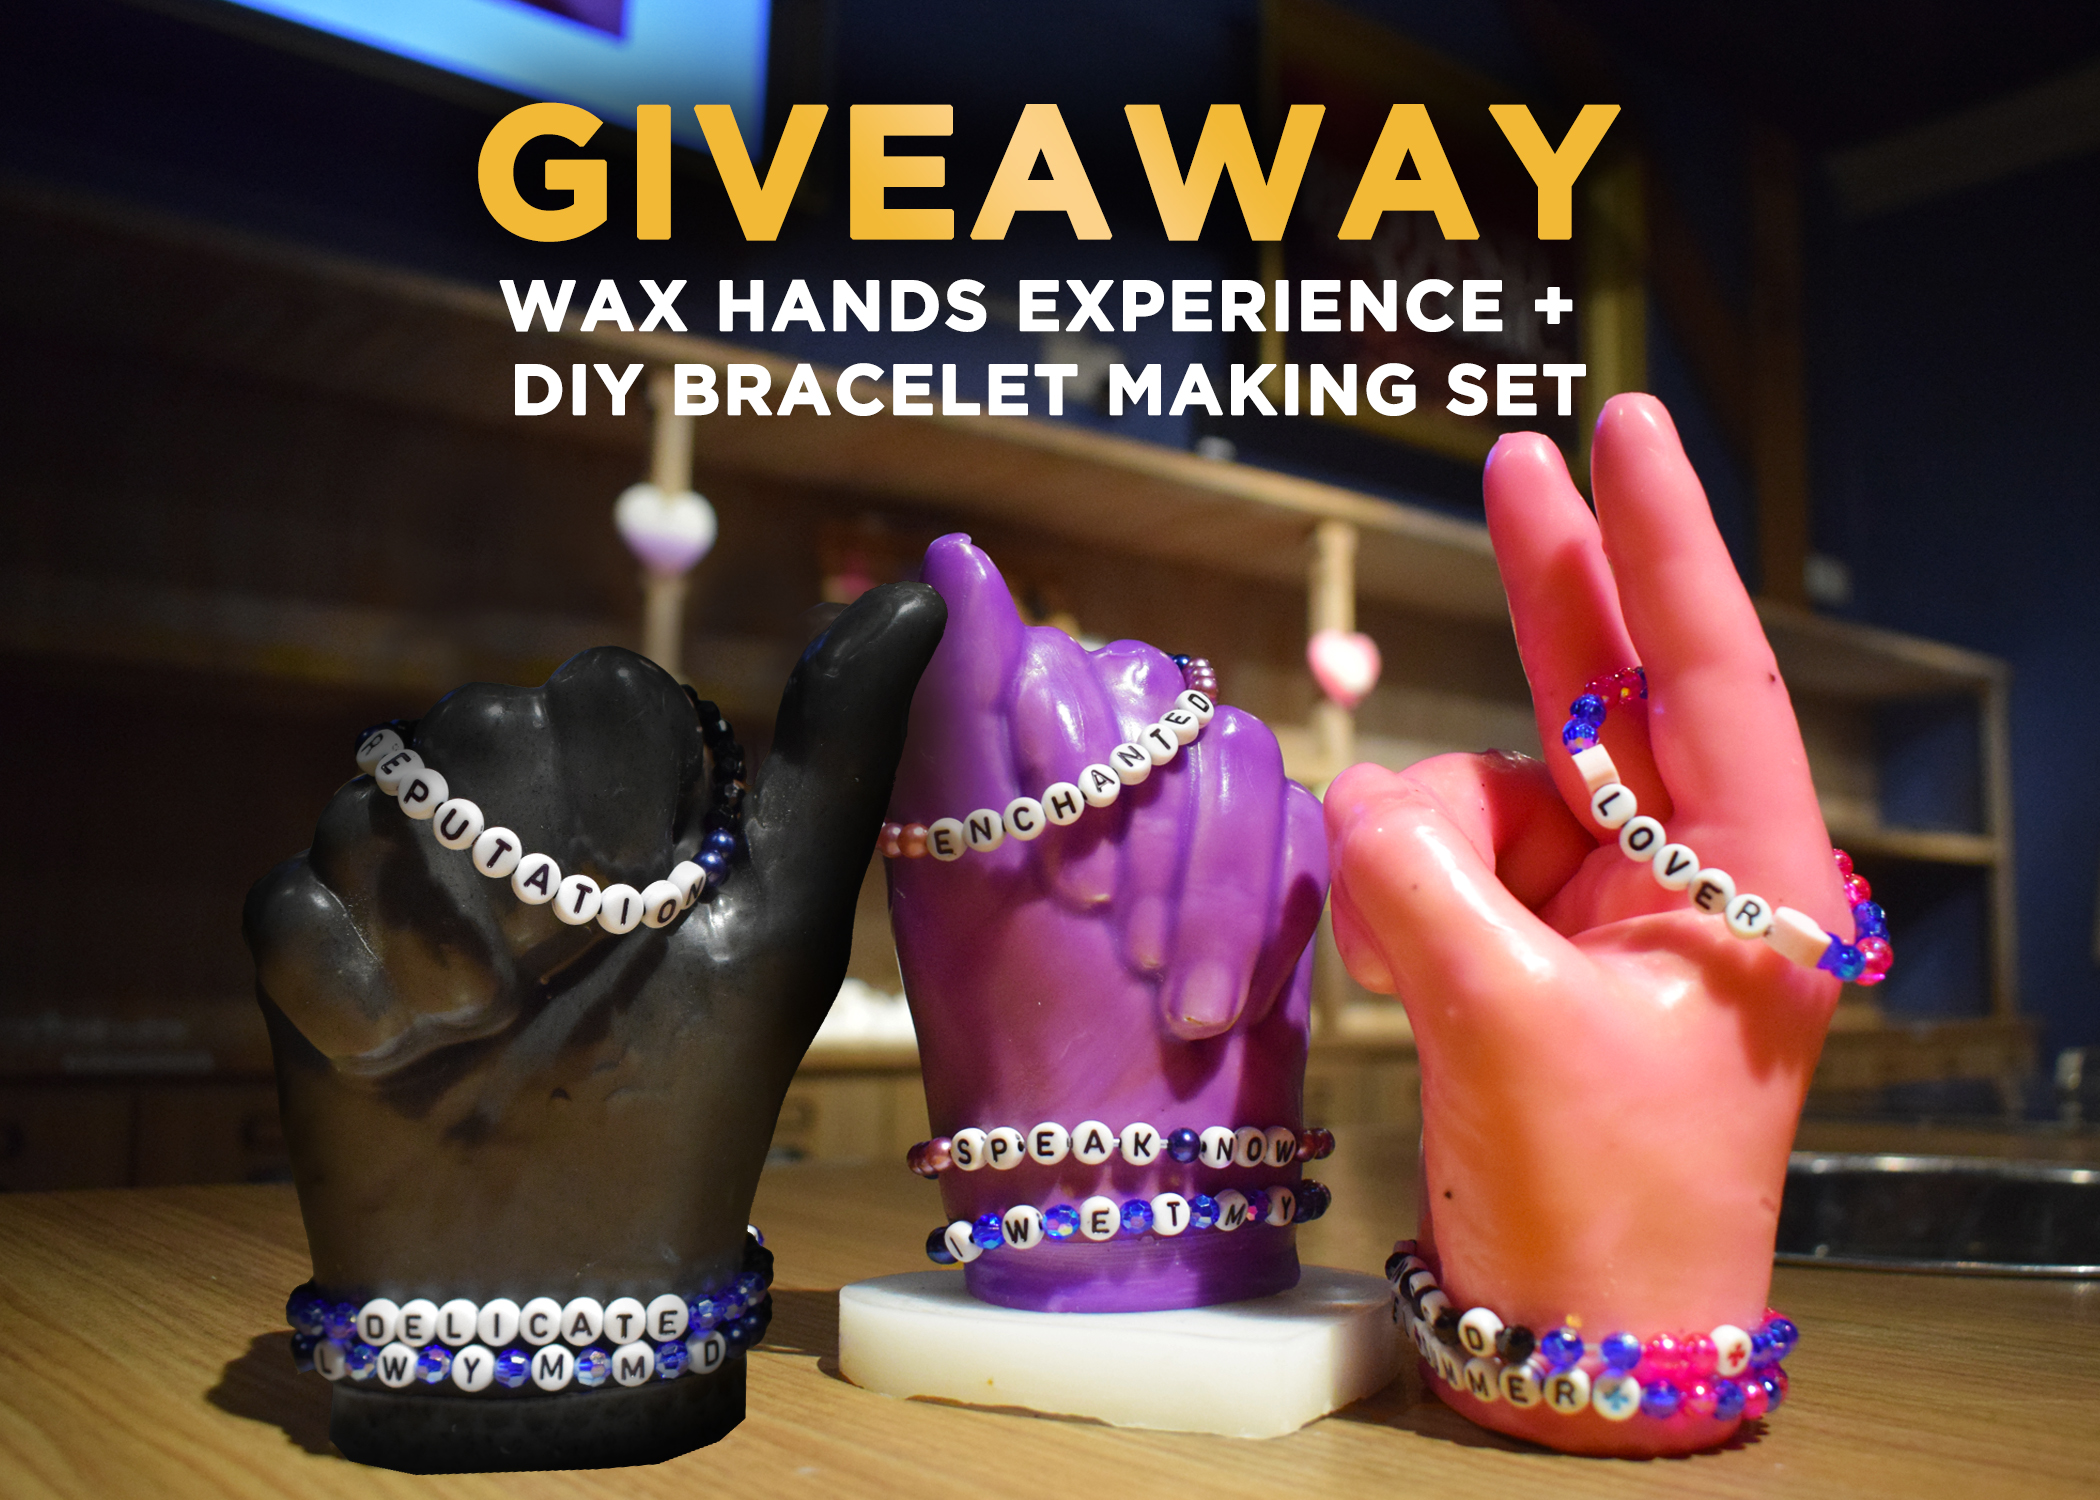 Wax Hands decorated with friendship bracelets of Taylor Swift's song lyrics